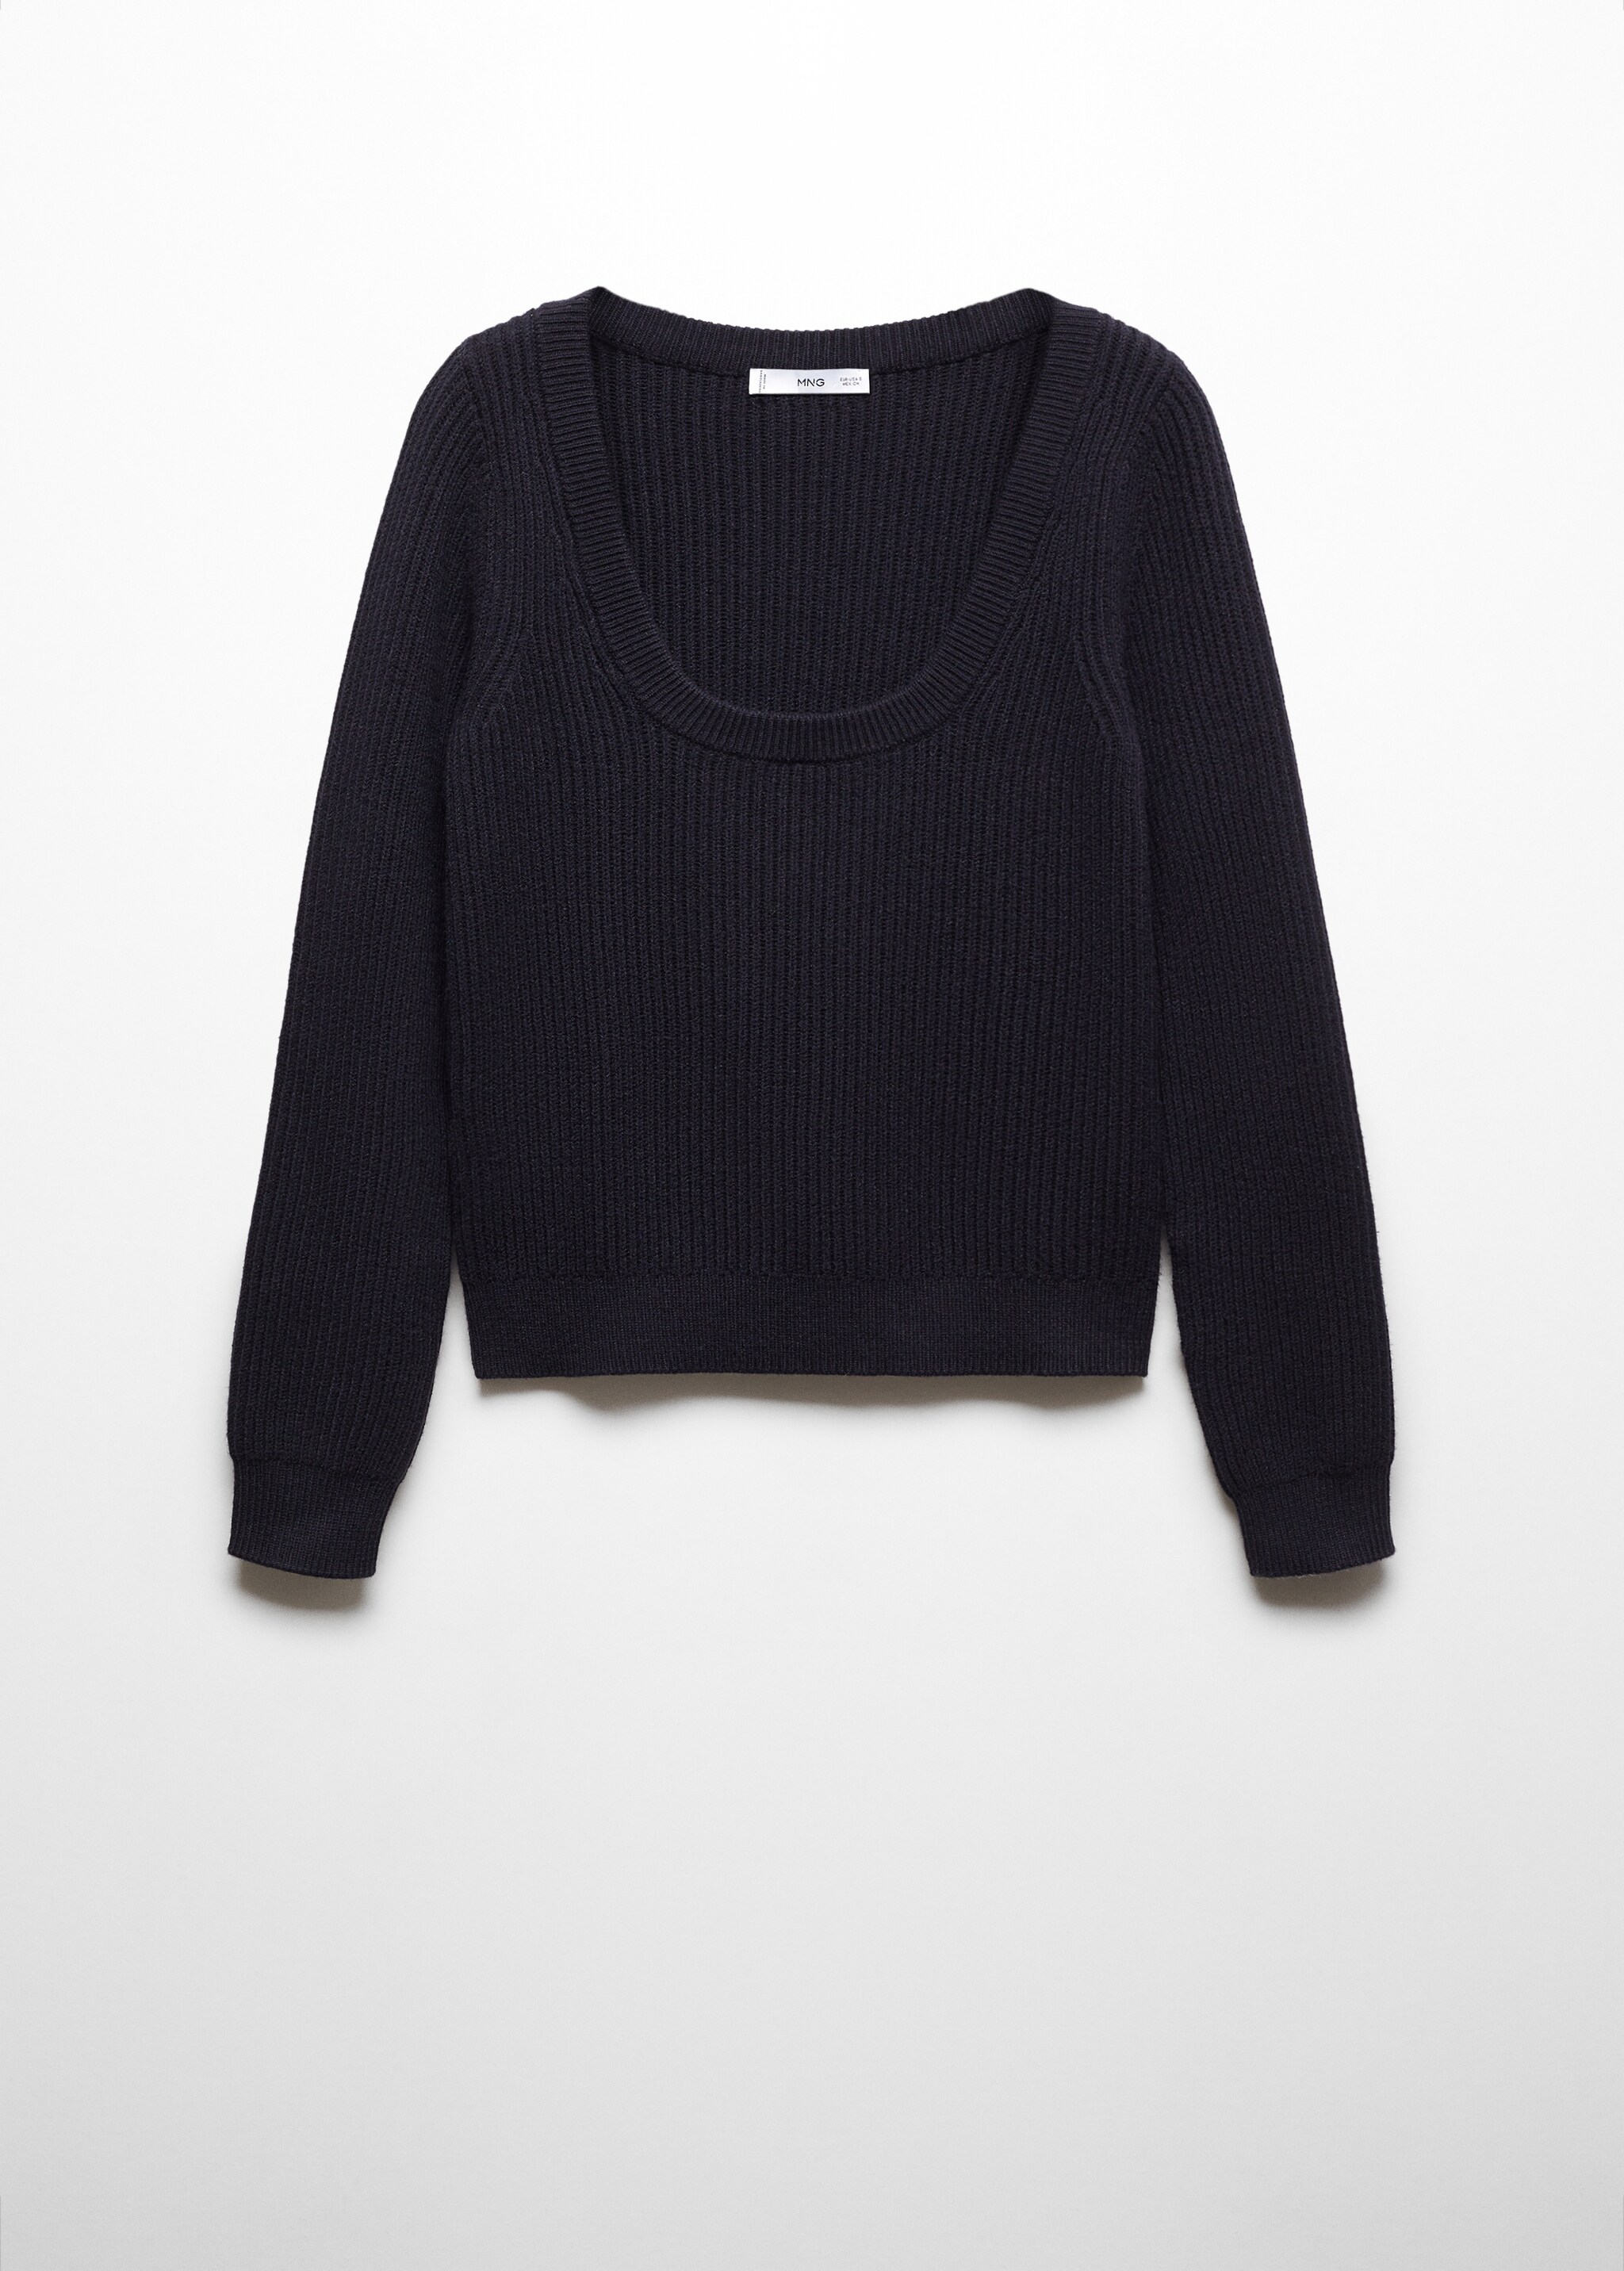 Low-cut neck sweater - Article without model